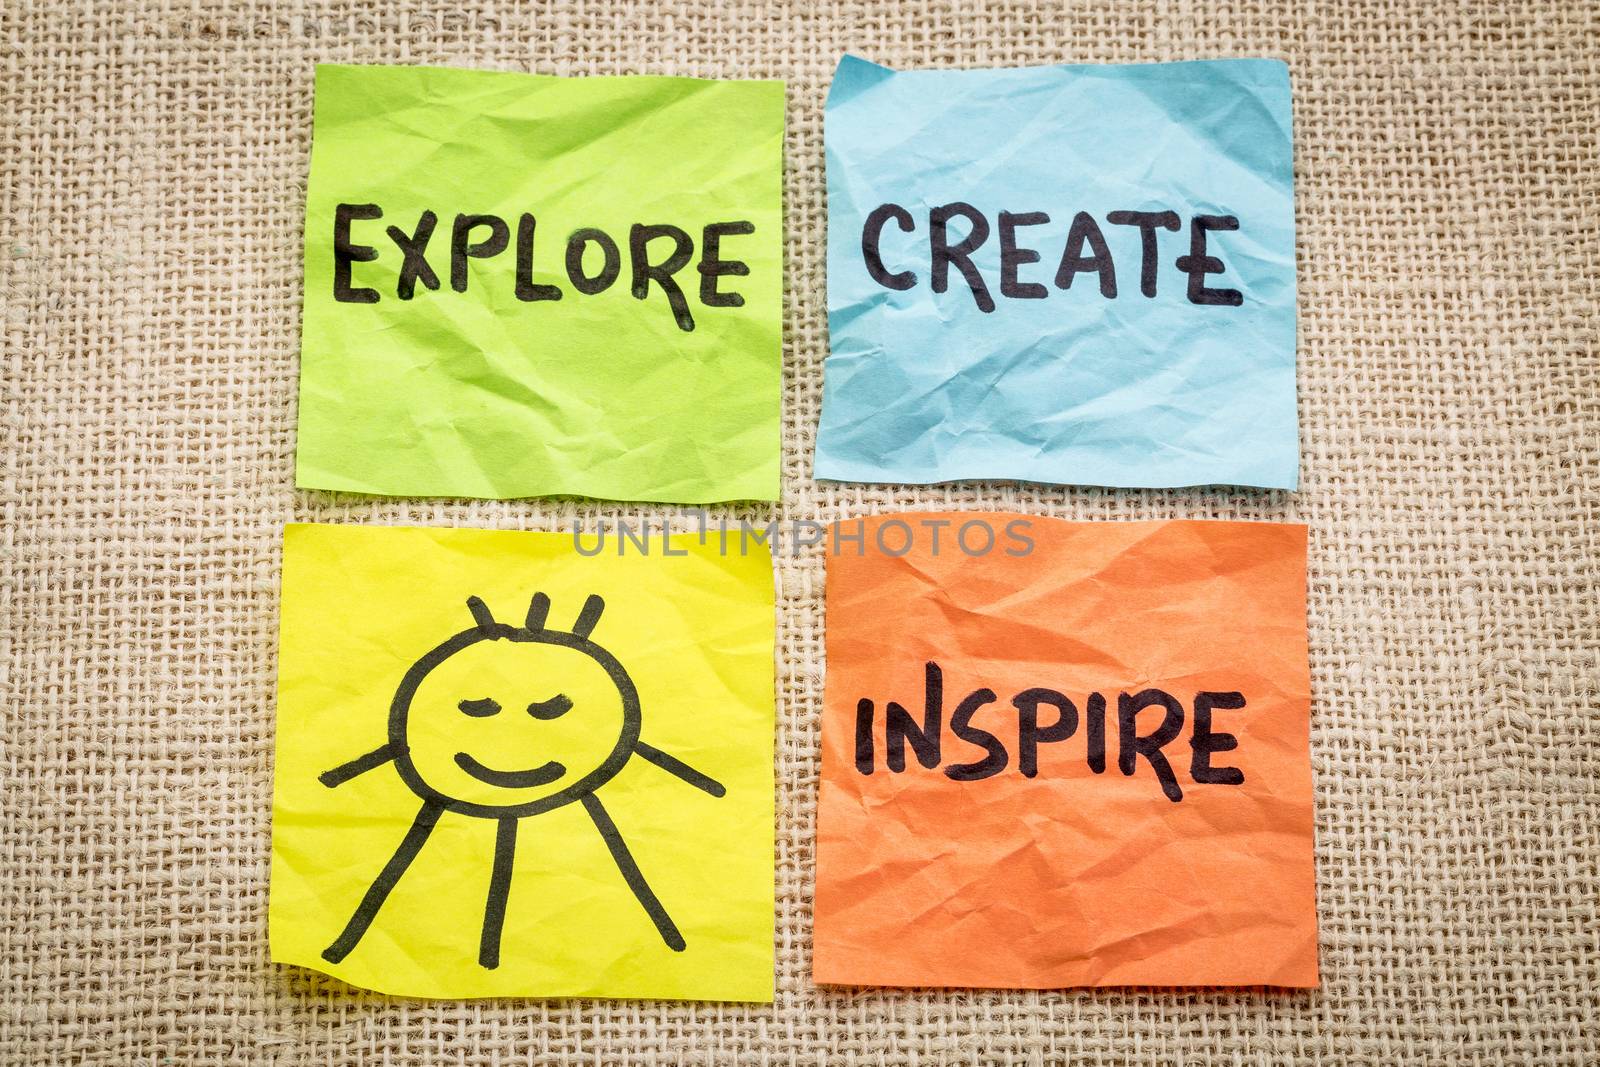 explore, create, inspire and smile reminder by PixelsAway